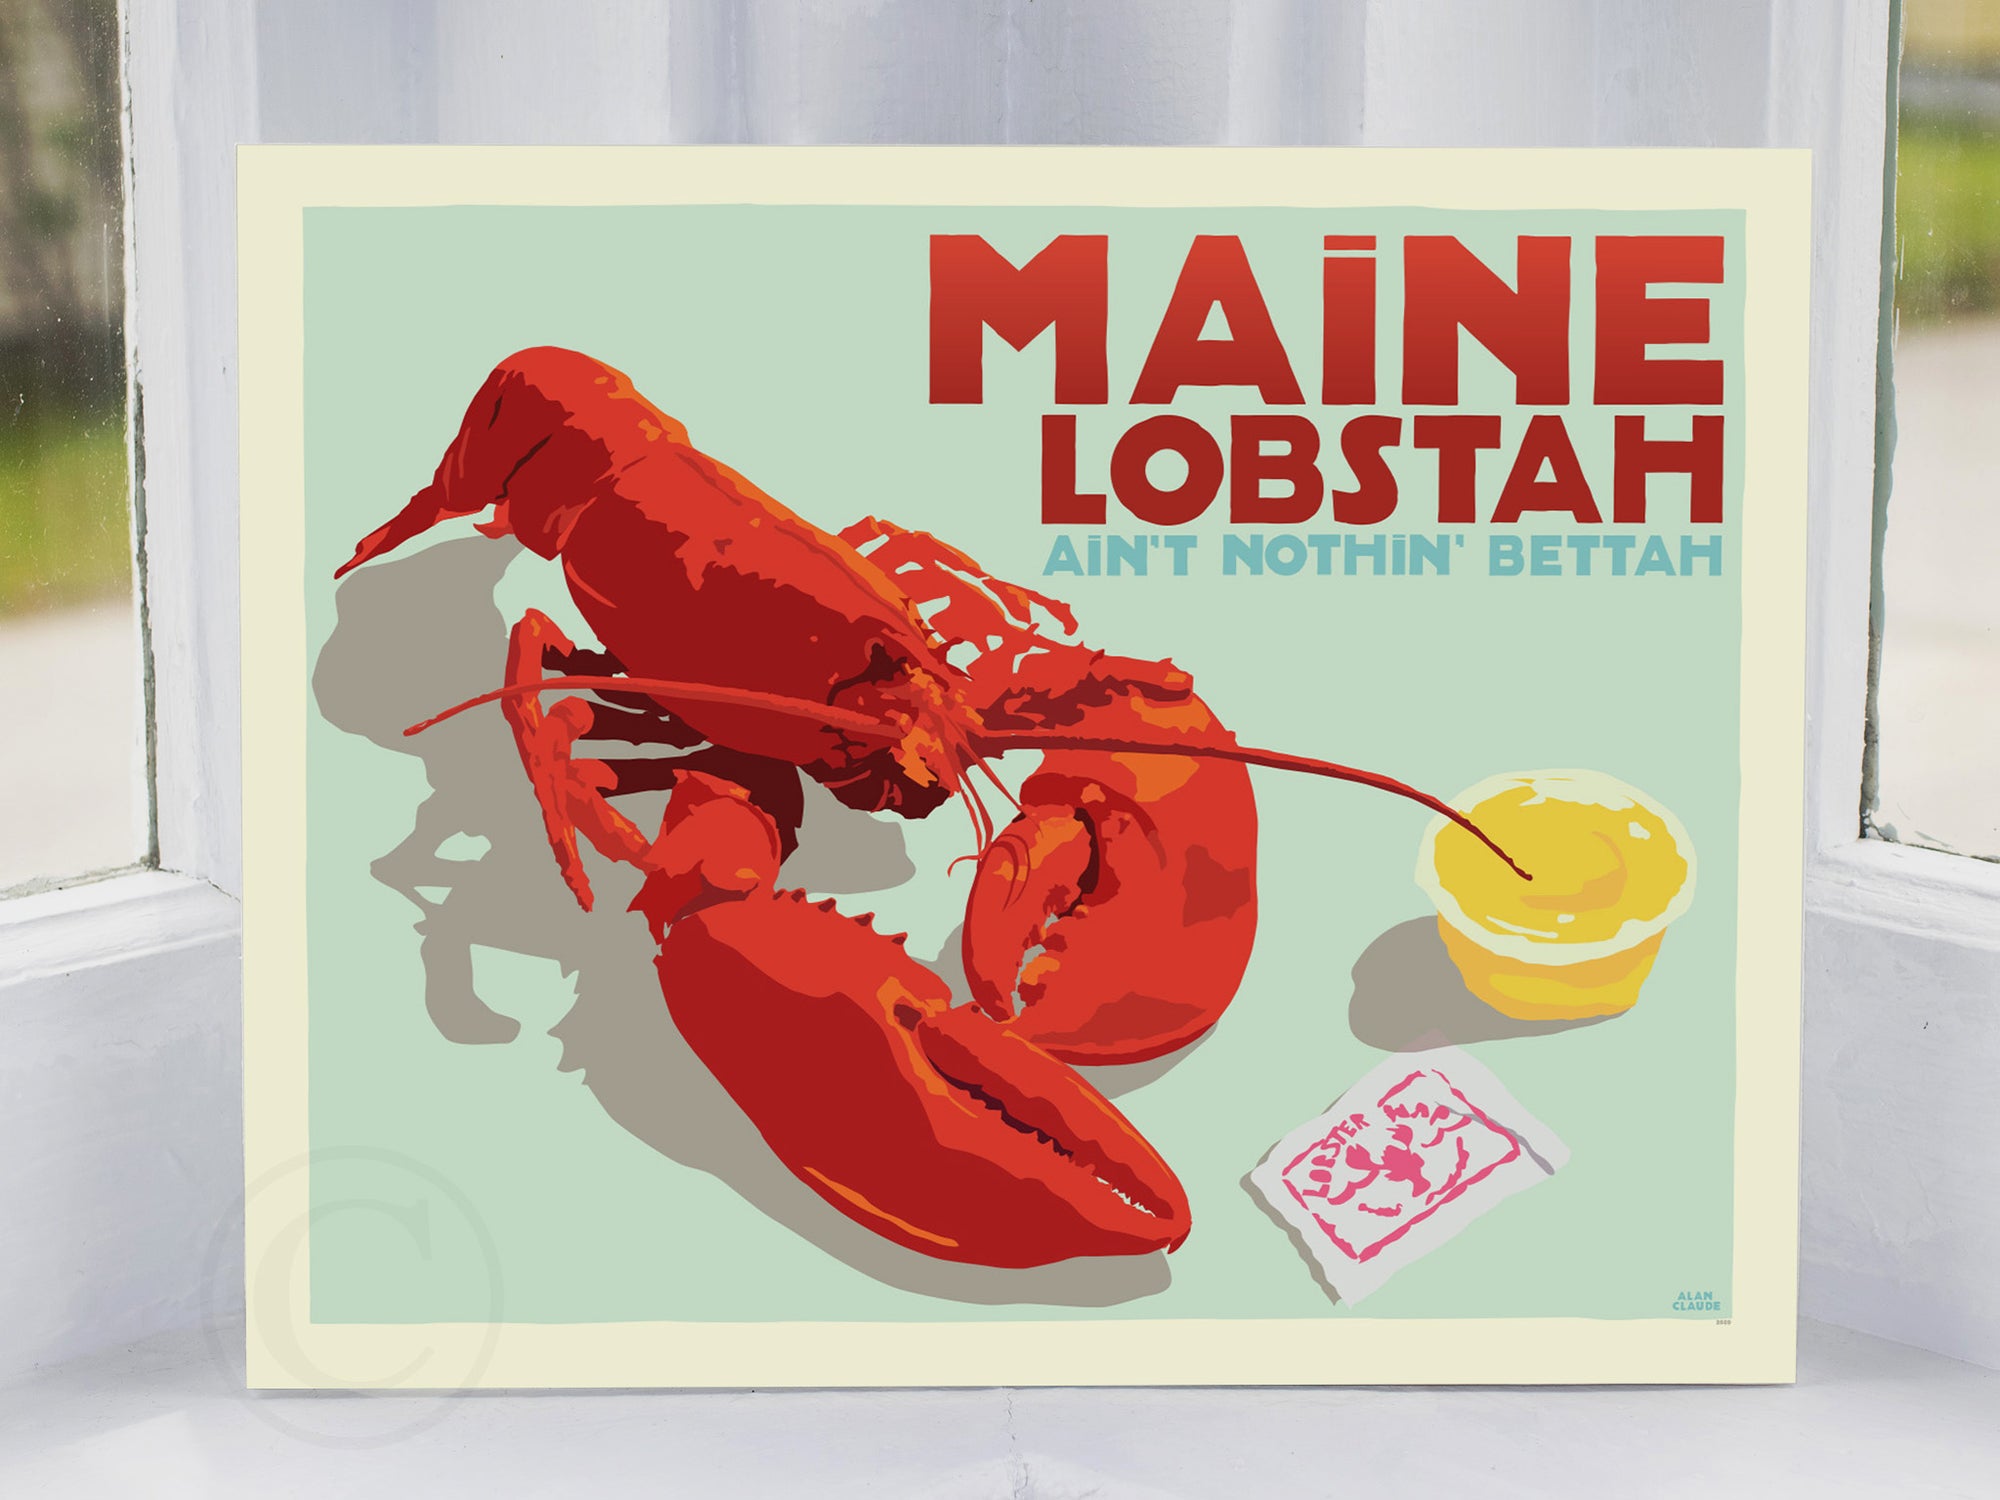 Maine Lobstah With Butter Art Print 8" x 10" Horizontal Wall Poster By Alan Claude - Maine